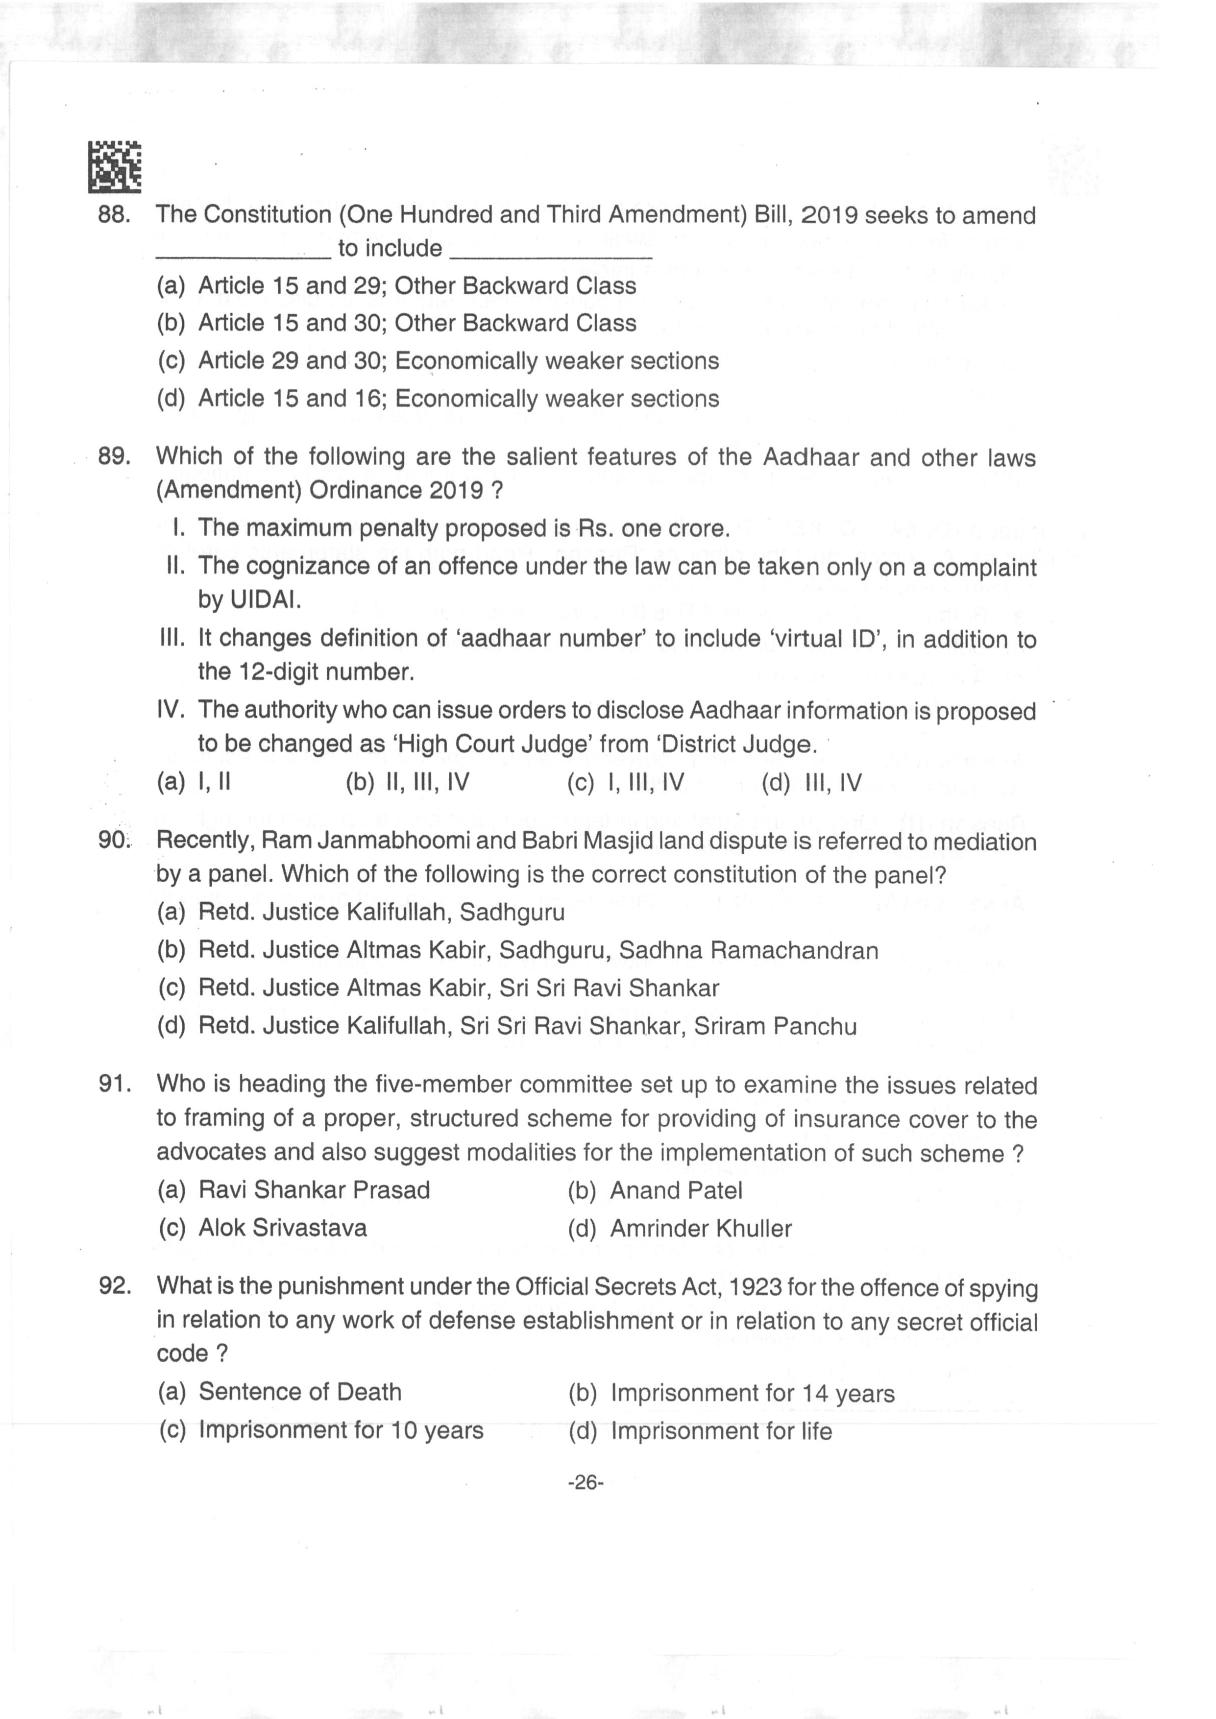 AILET 2019 Question Paper for BA LLB - Page 26